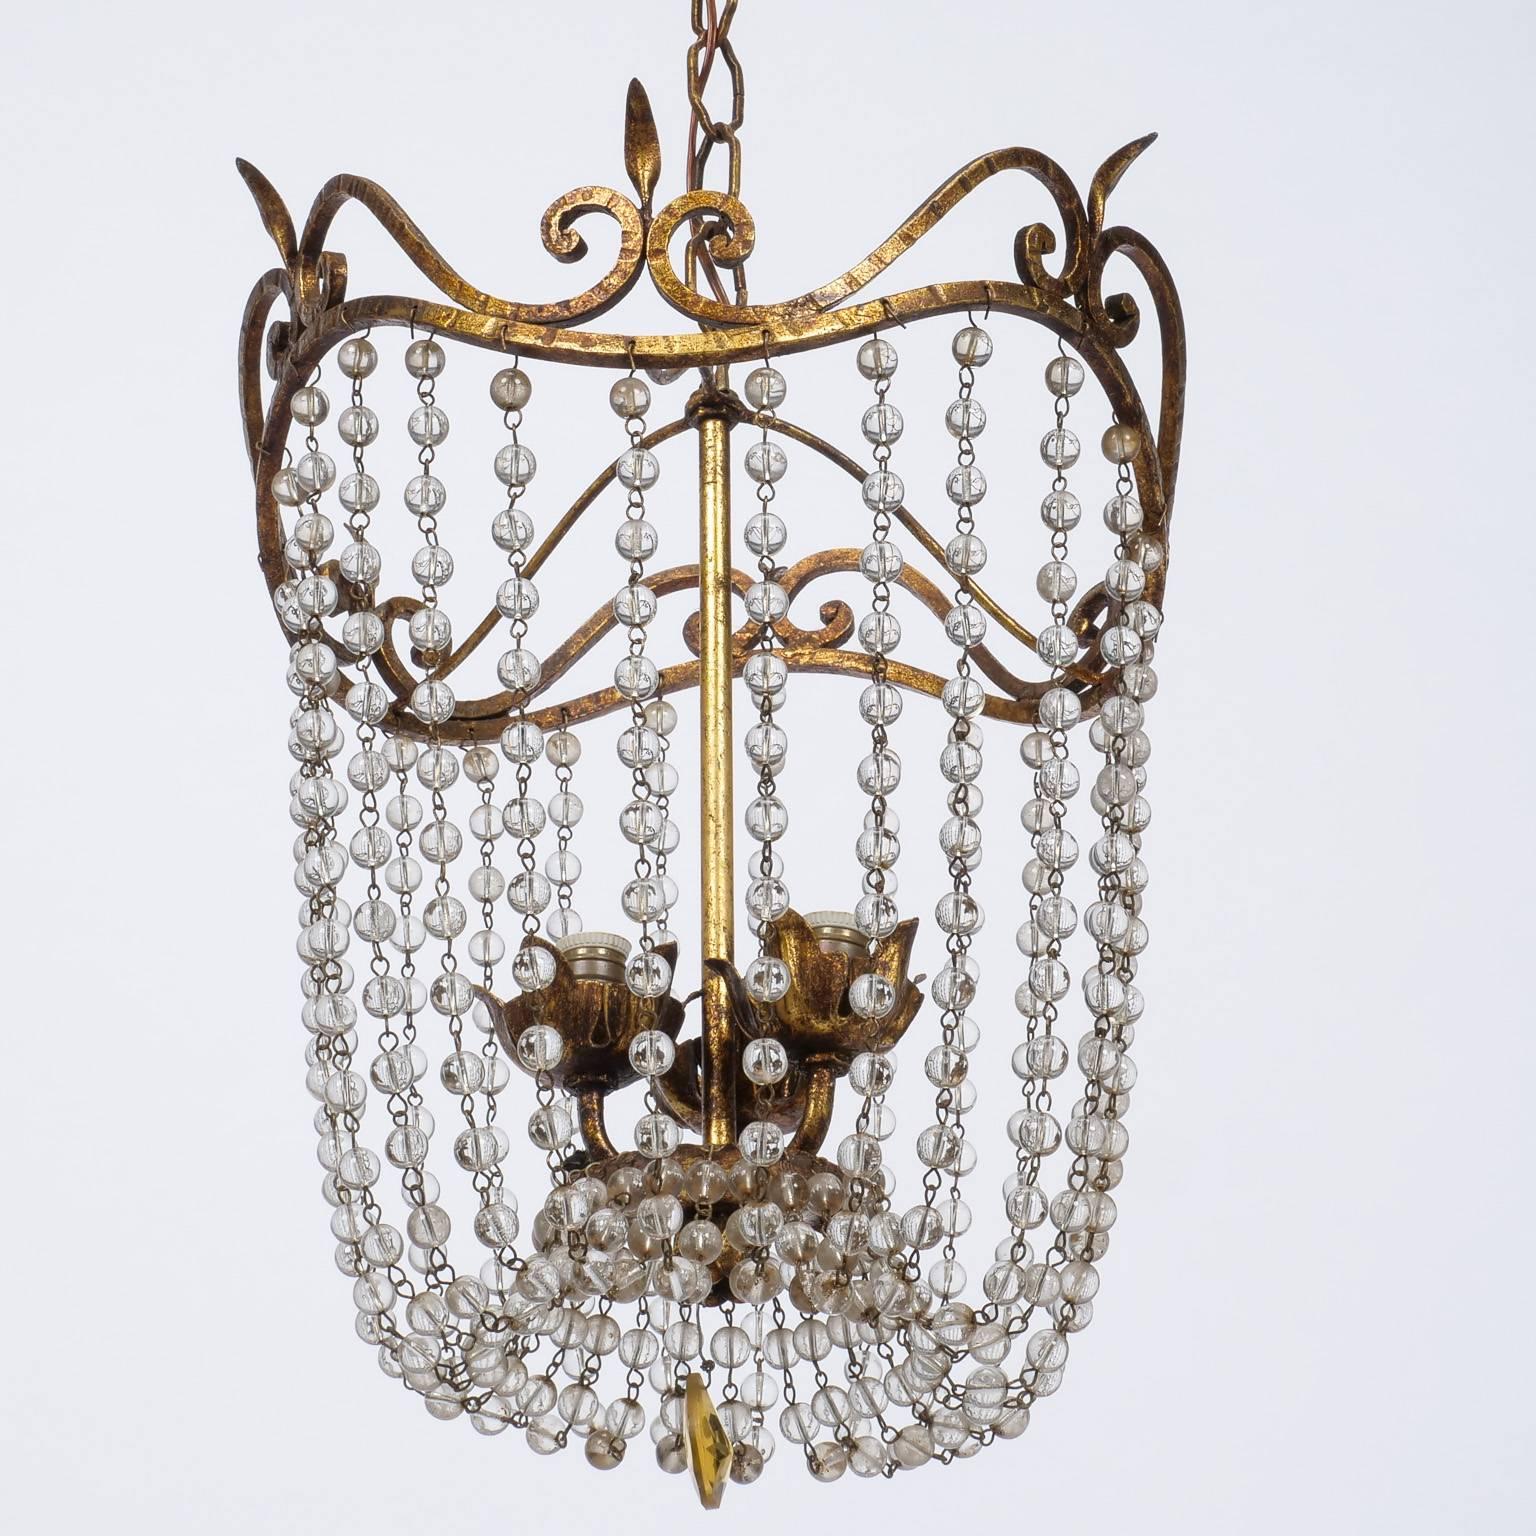 20th Century Empire Chandelier with Gilt Iron and Cascading Beads